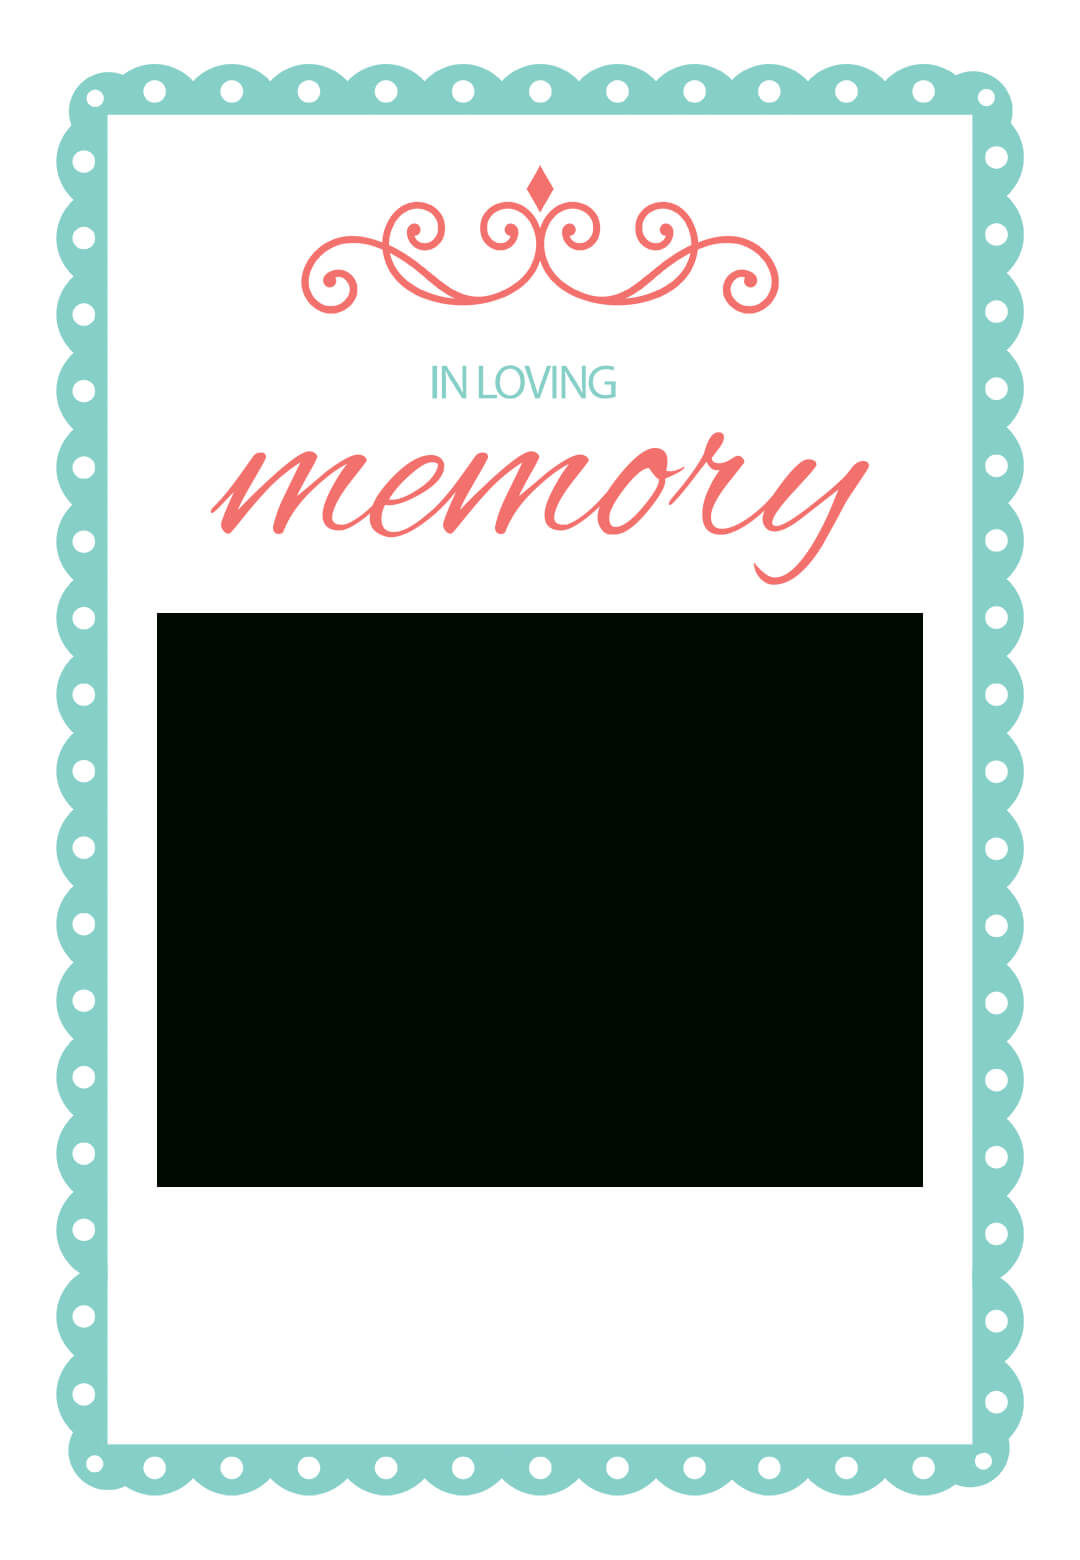 002 Free Memorial Cards Template Awful Ideas Funeral Card Throughout Remembrance Cards Template Free